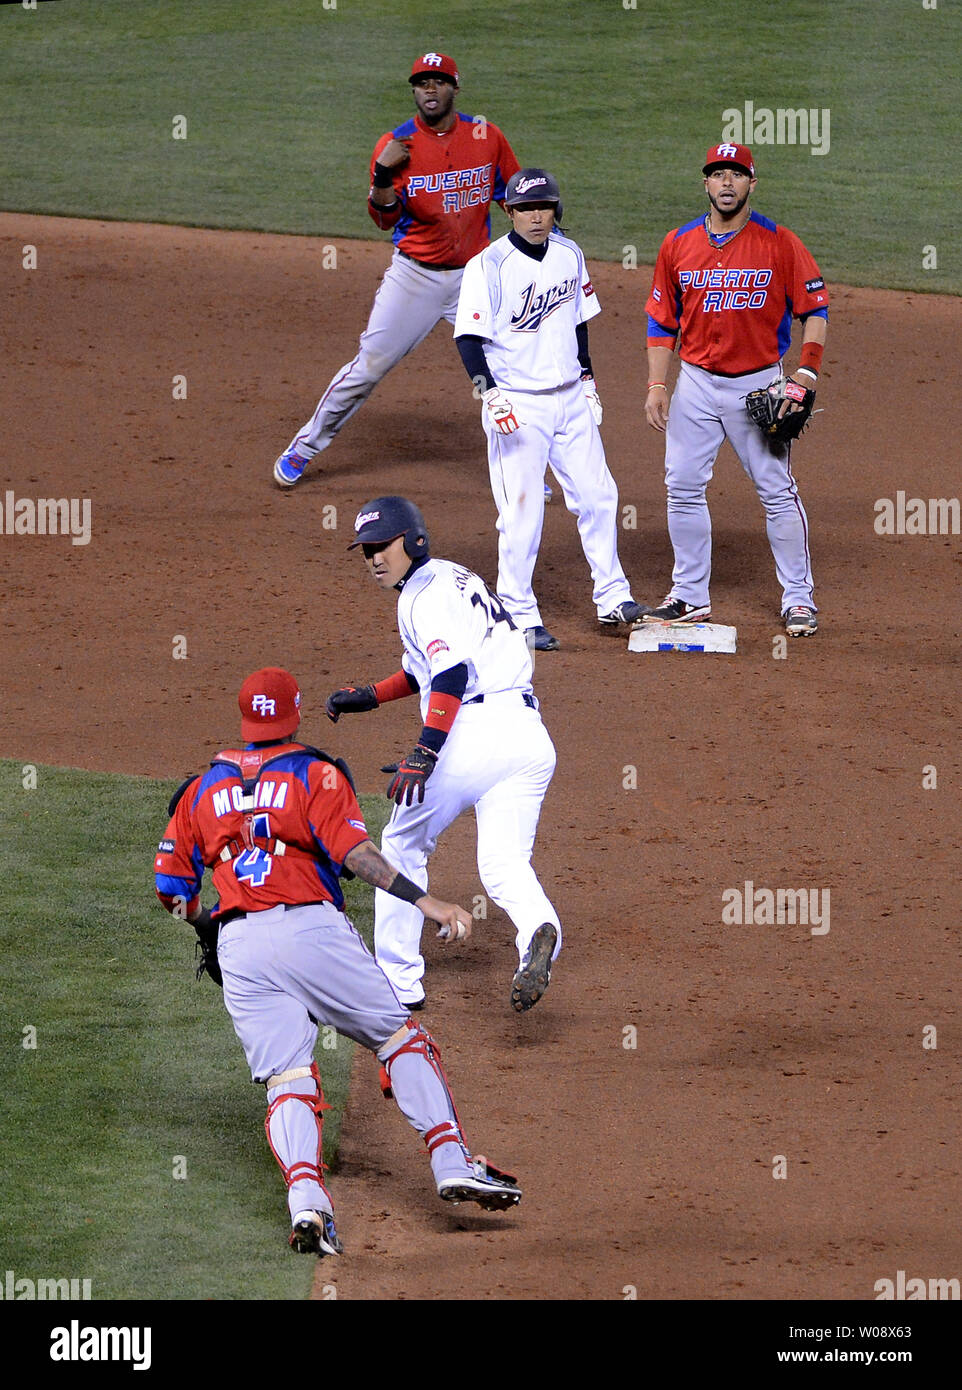 Puerto Rico's catcher Yadier Molina (4) chases down Japan's Seiichi  Uchikawa (24) after he was caught stealing in the eighth inning in the semi  finals of the World Baseball Classic at AT&T